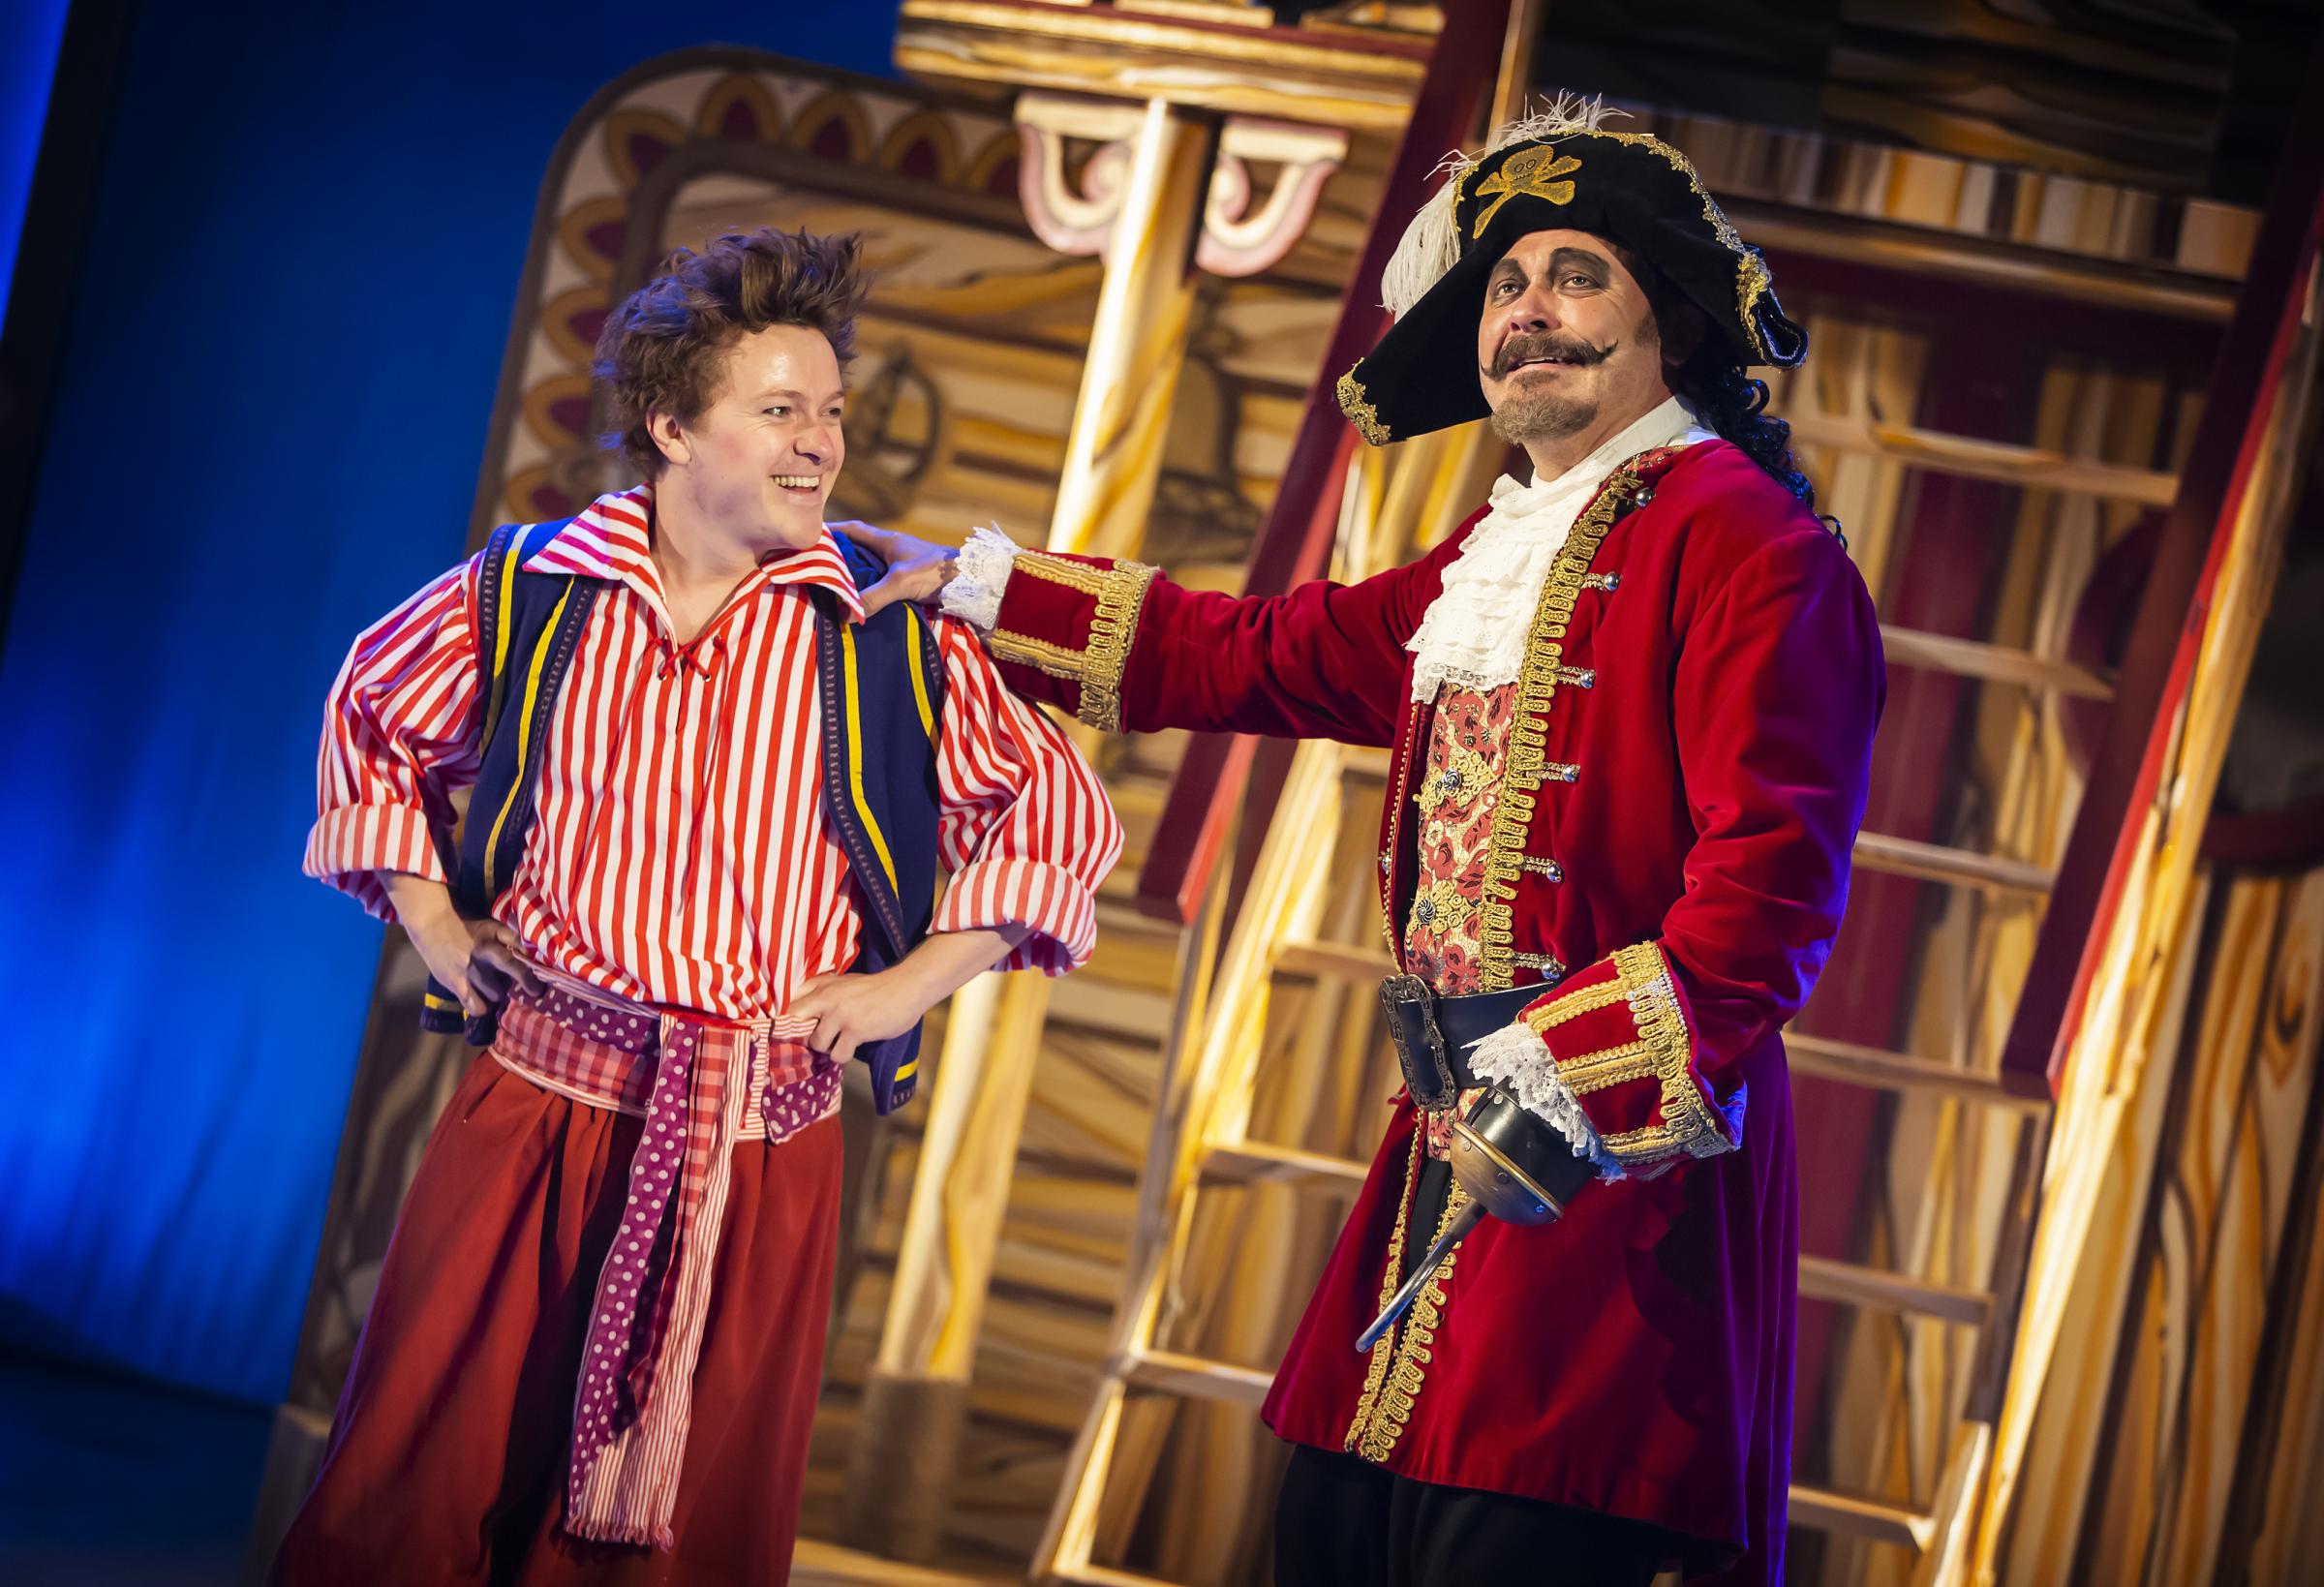 All New Adventures of Peter Pan: Panto takes off at York Theatre Royal